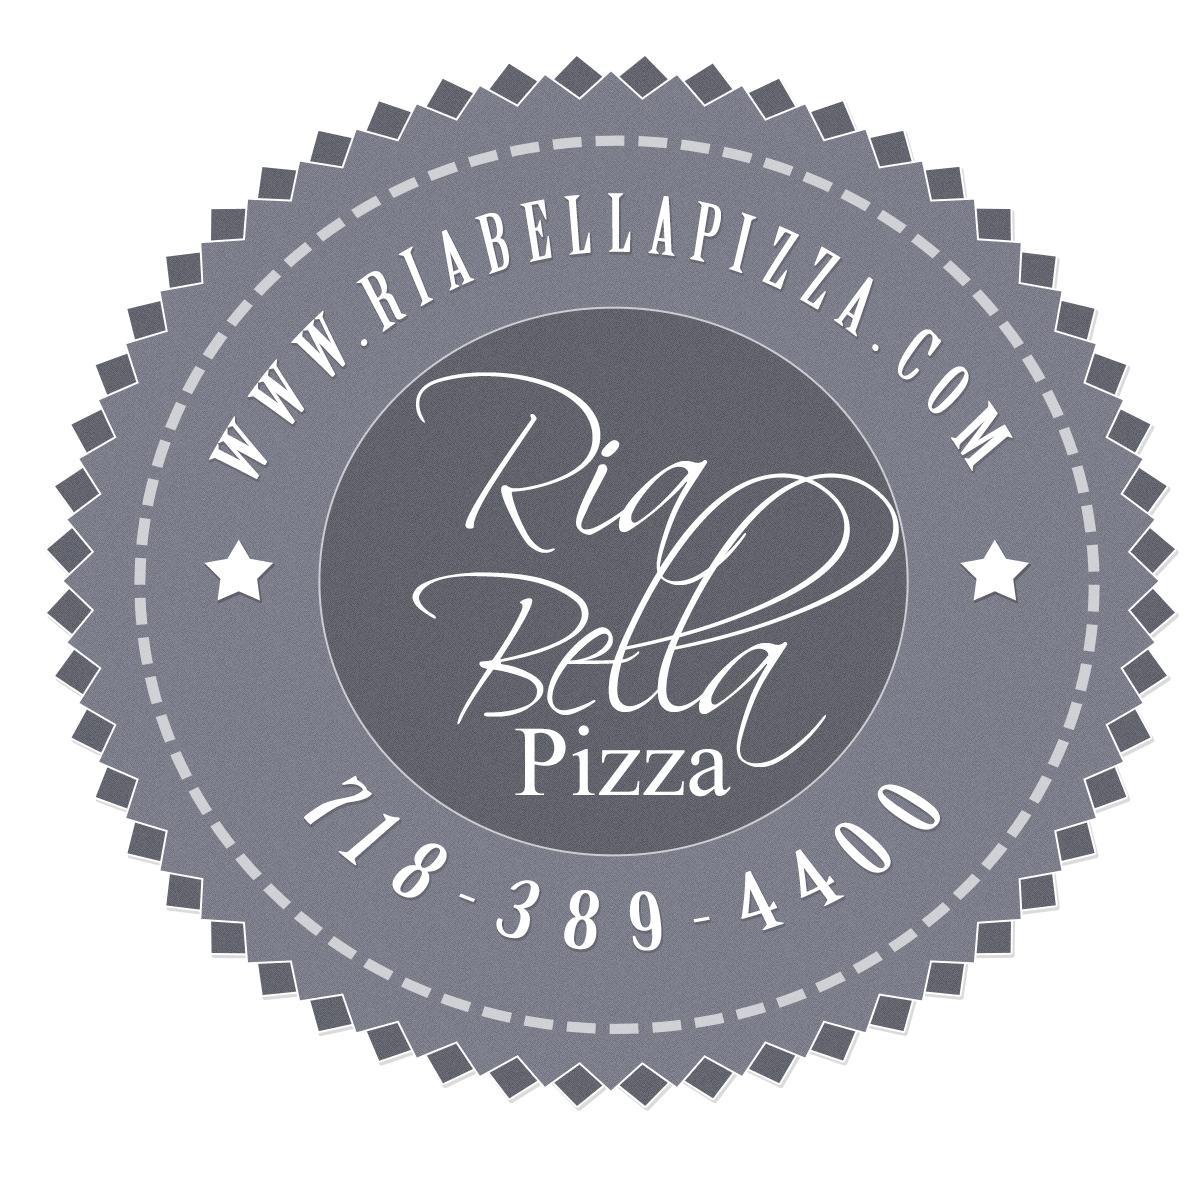 Offical Ria Bella Pizza of Greenpoint account